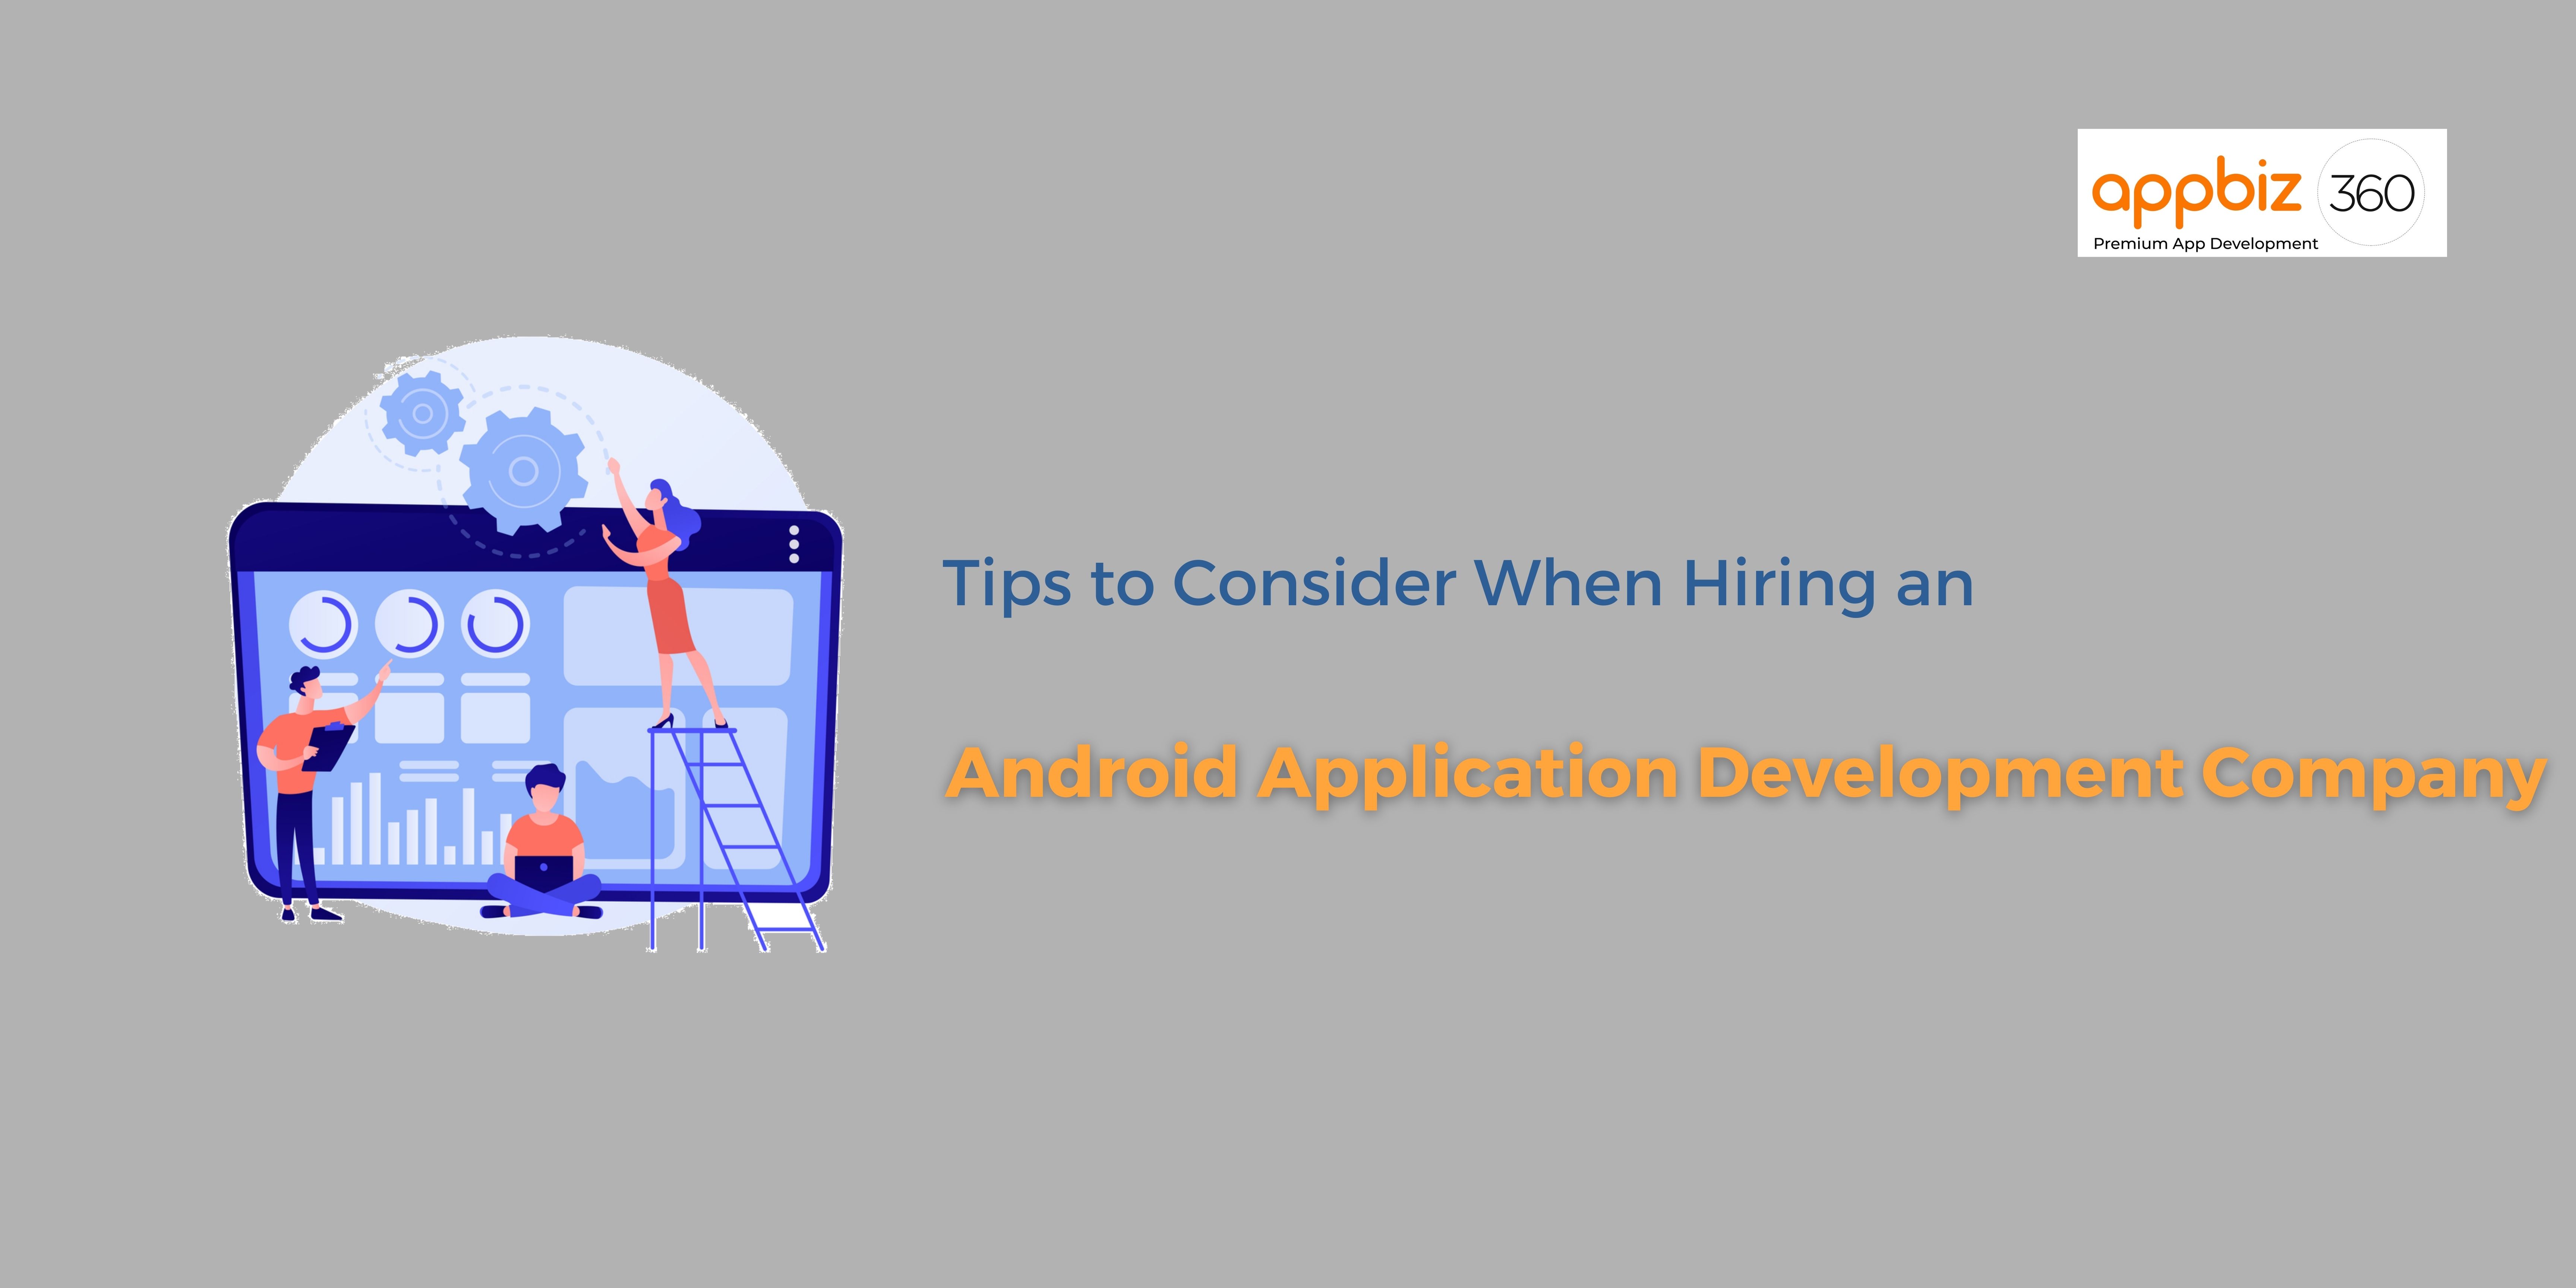 Tips to Consider When Hiring an Android Application Development Company